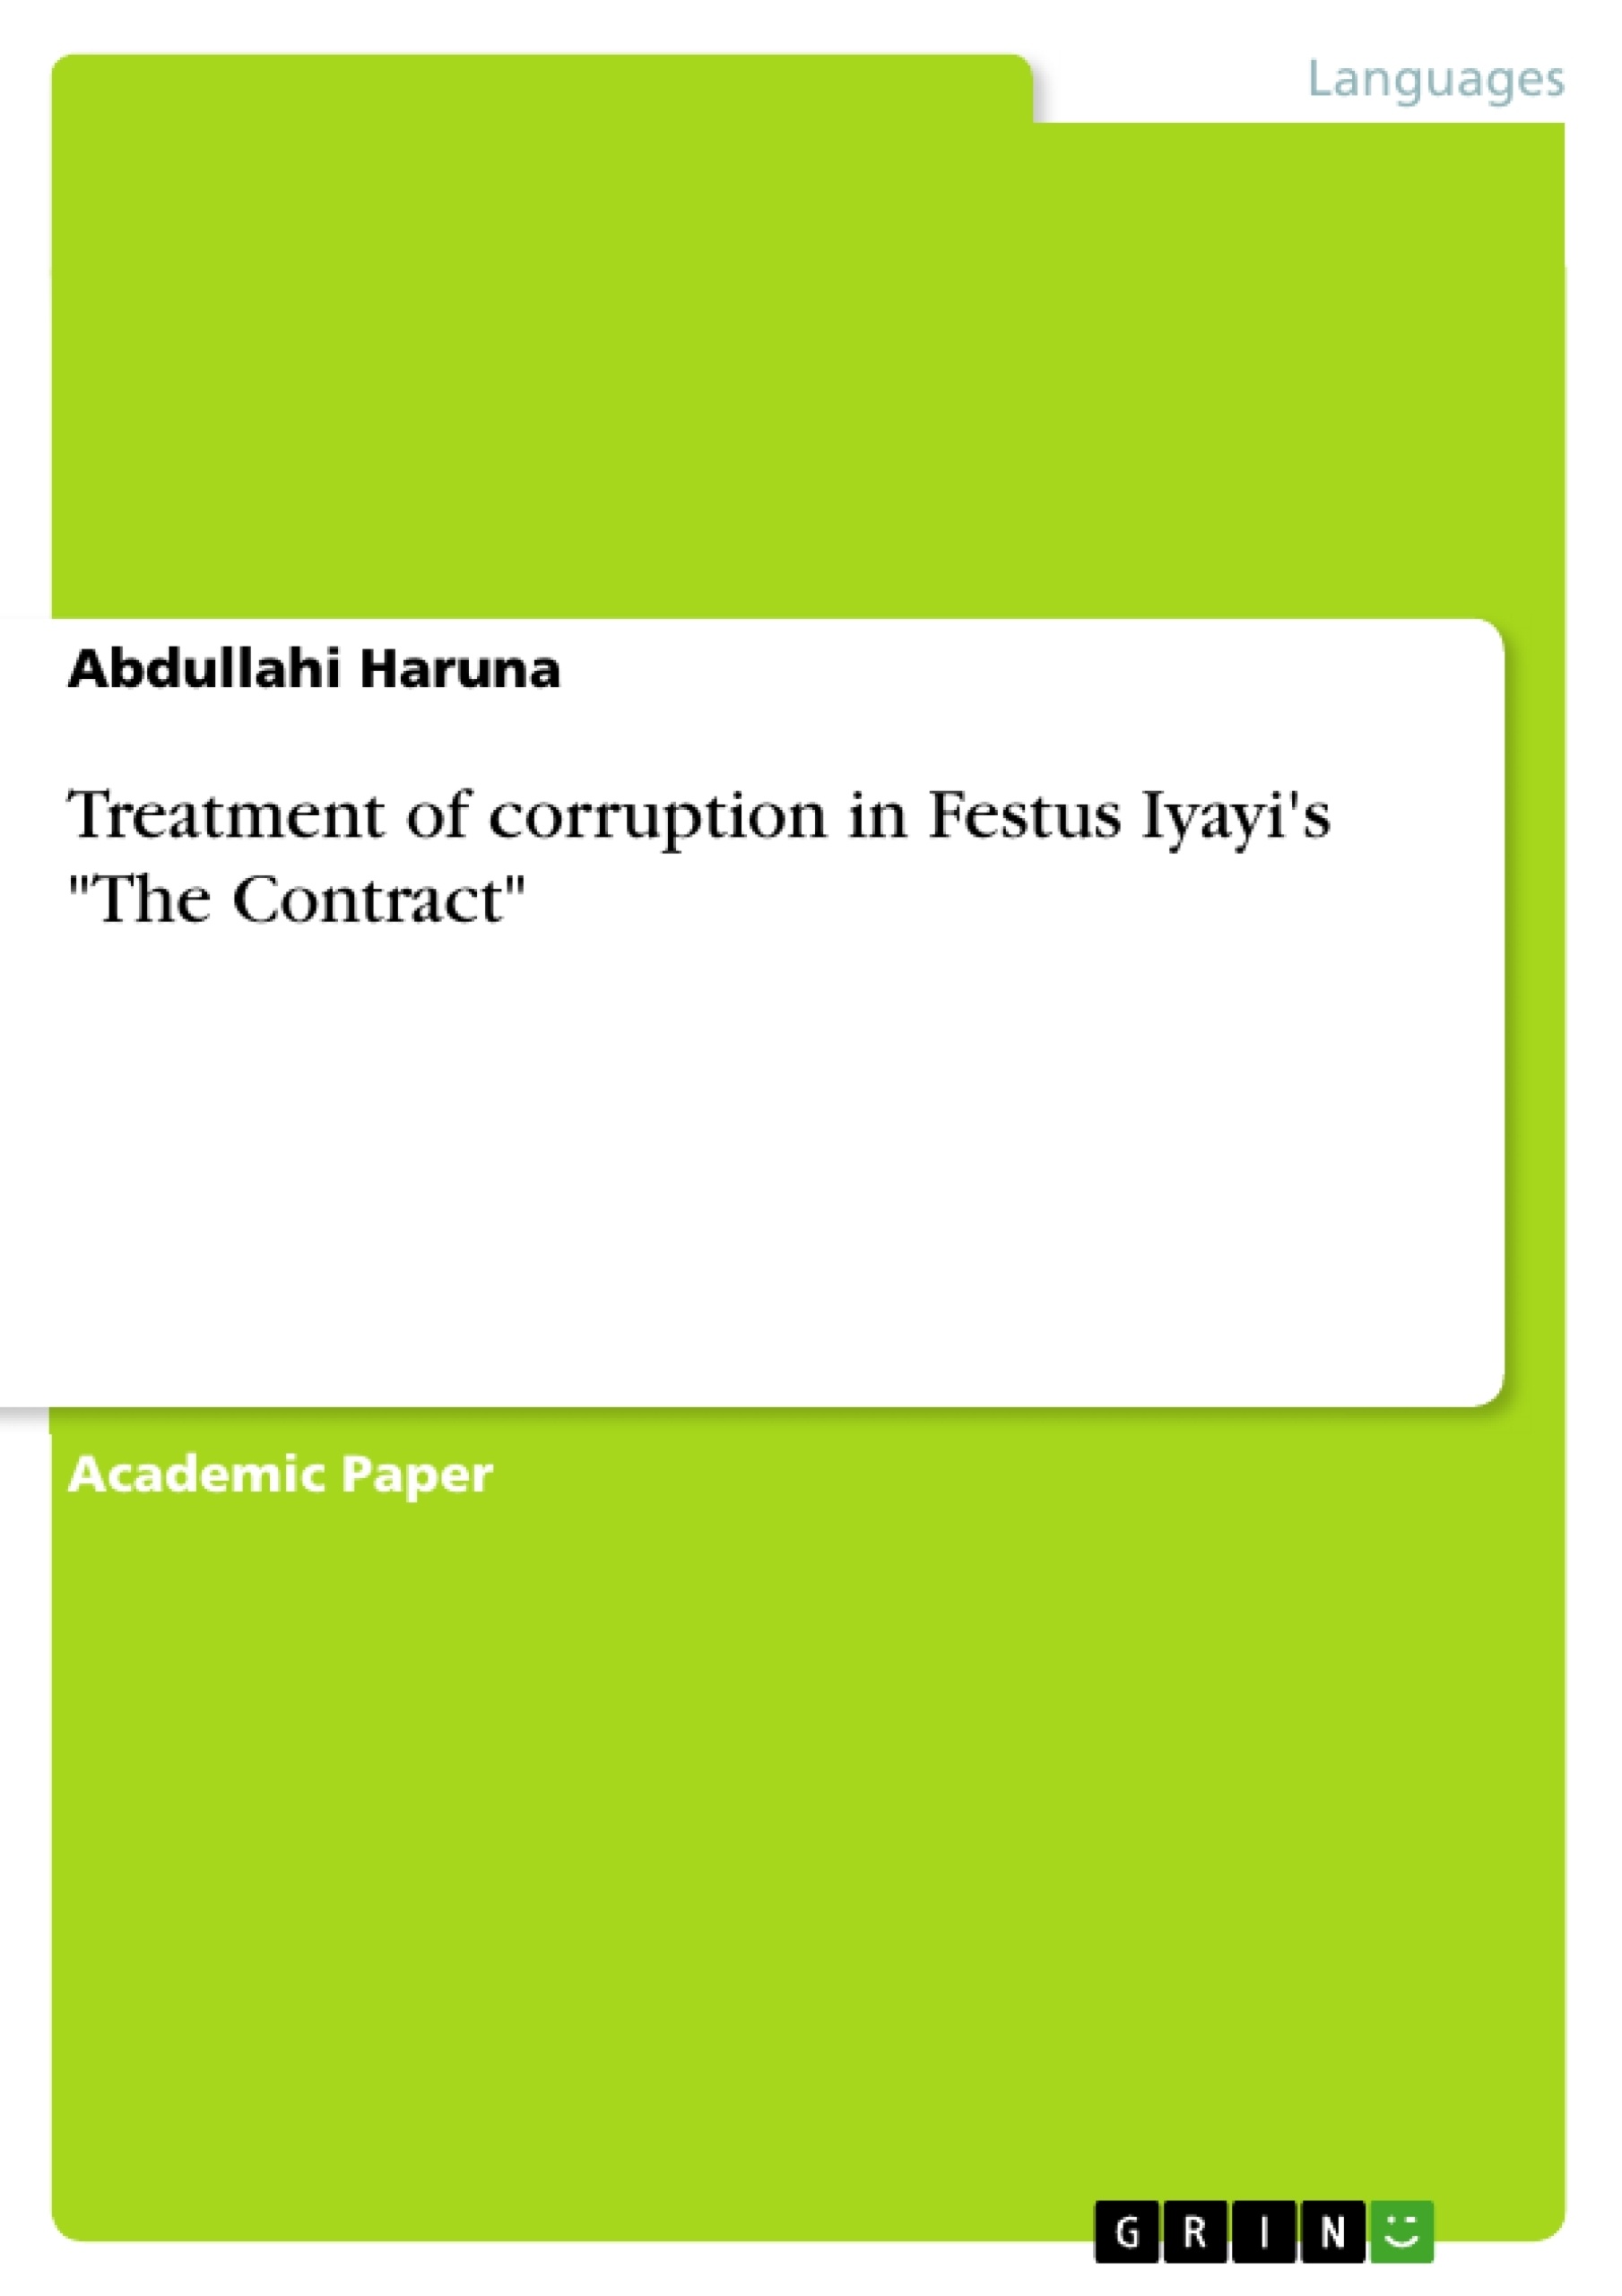 Title: Treatment of corruption in Festus Iyayi's "The Contract"